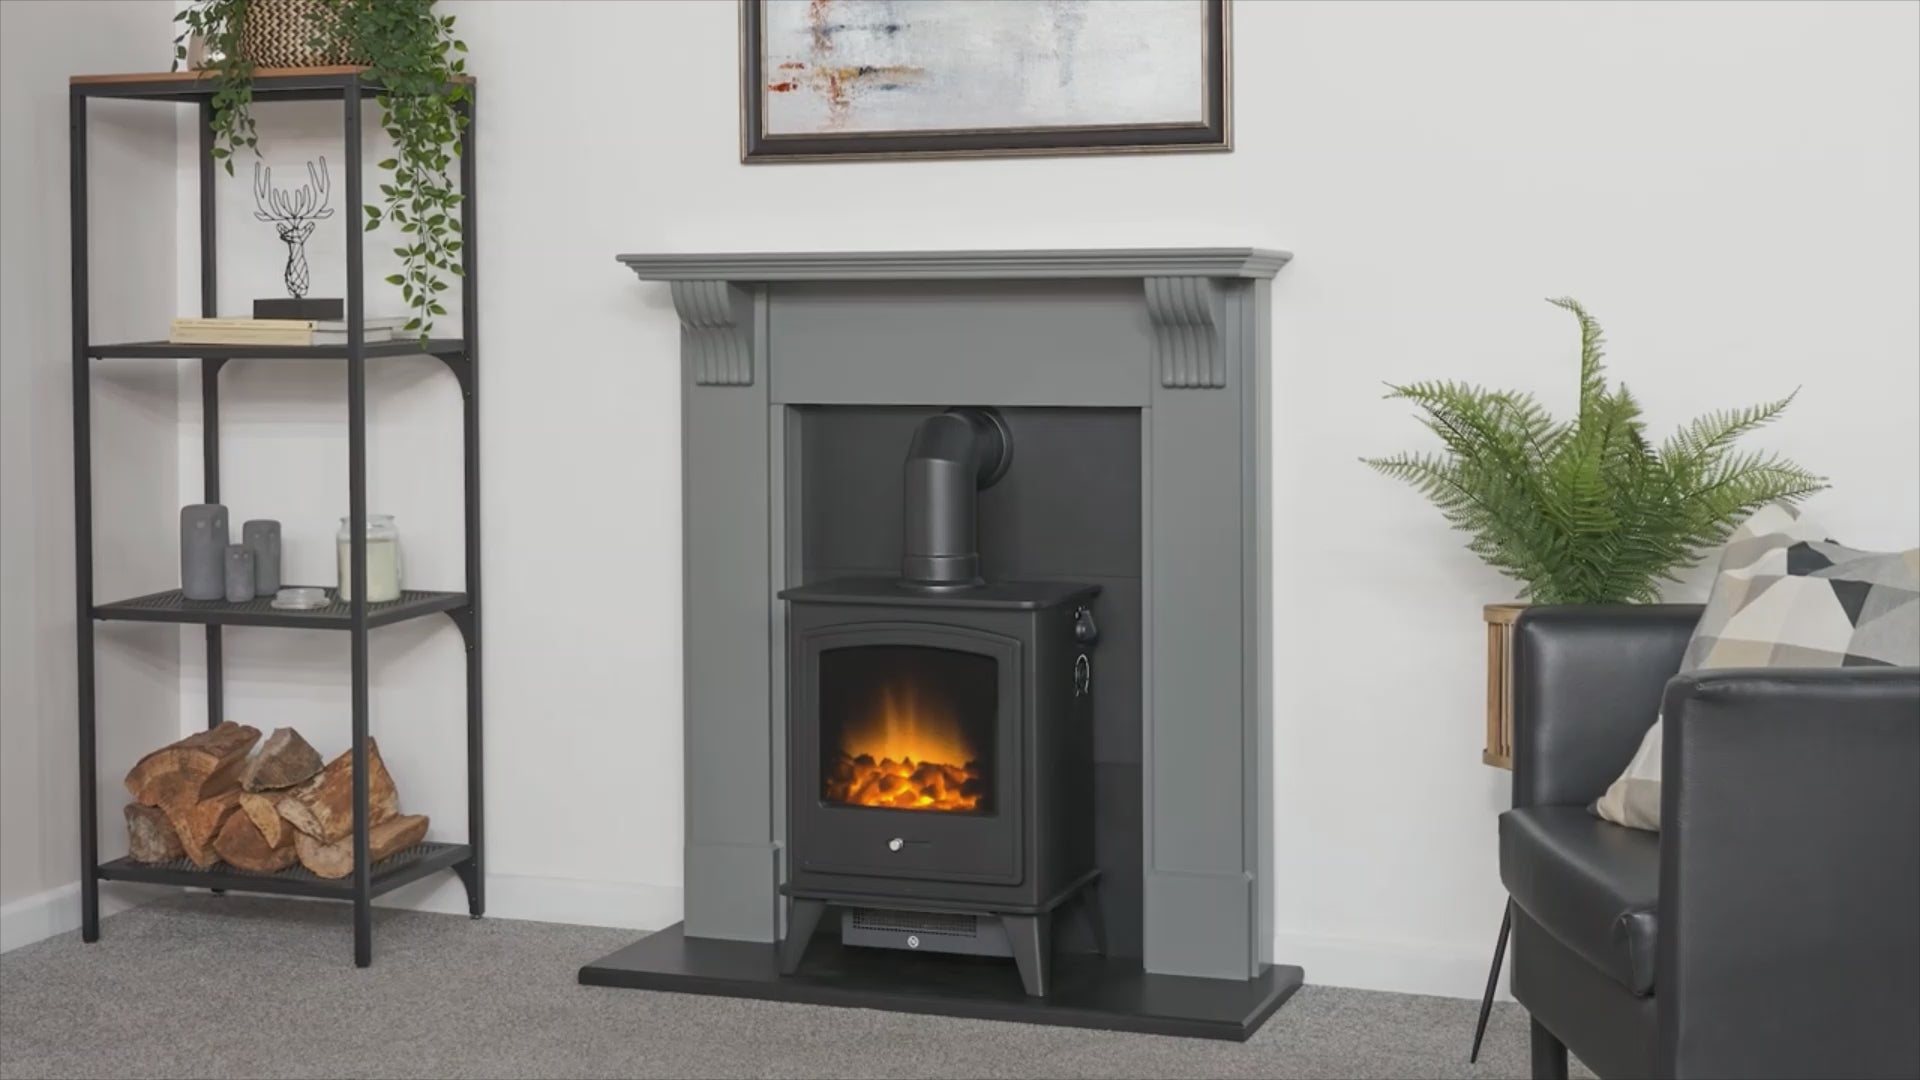 Adam Huxley in Pure White & Grey with Dorset Electric Stove in Grey, 39 Inch